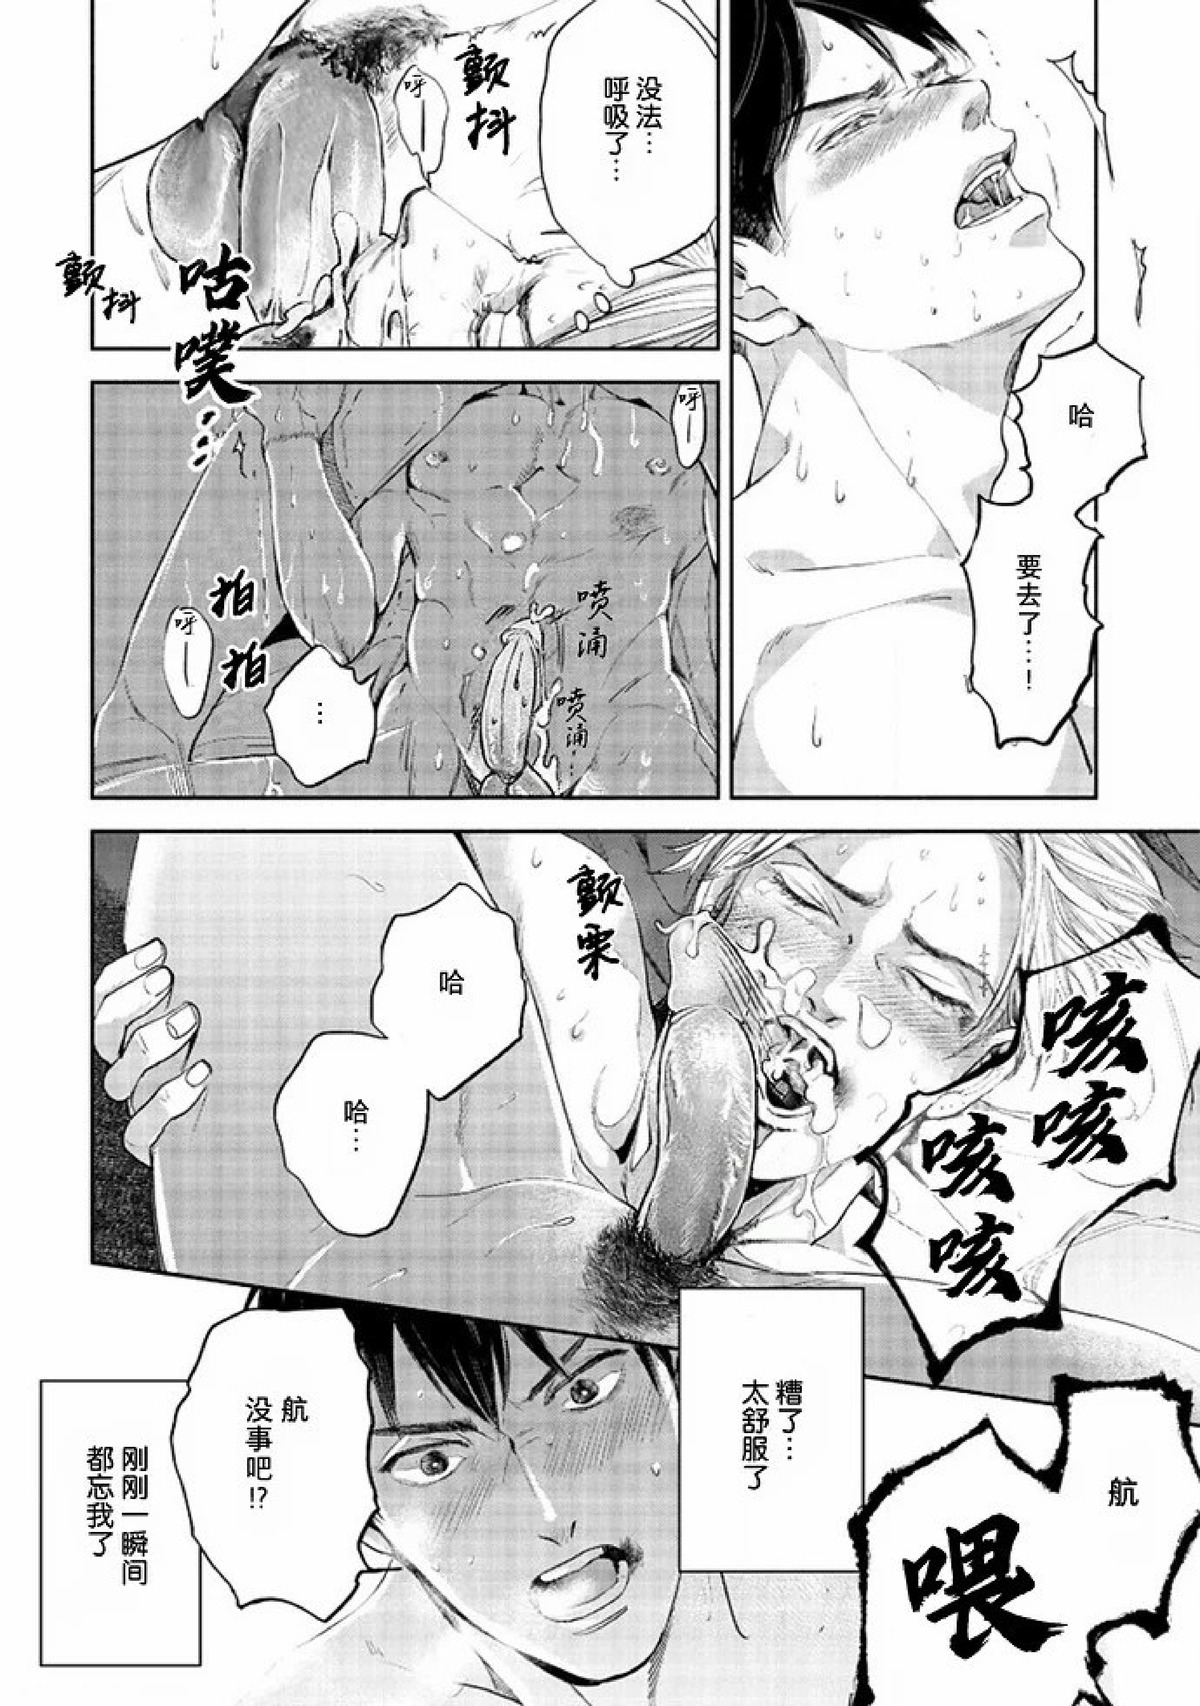 【Two sides of the same coin[腐漫]】漫画-（上卷01-02）章节漫画下拉式图片-96.jpg